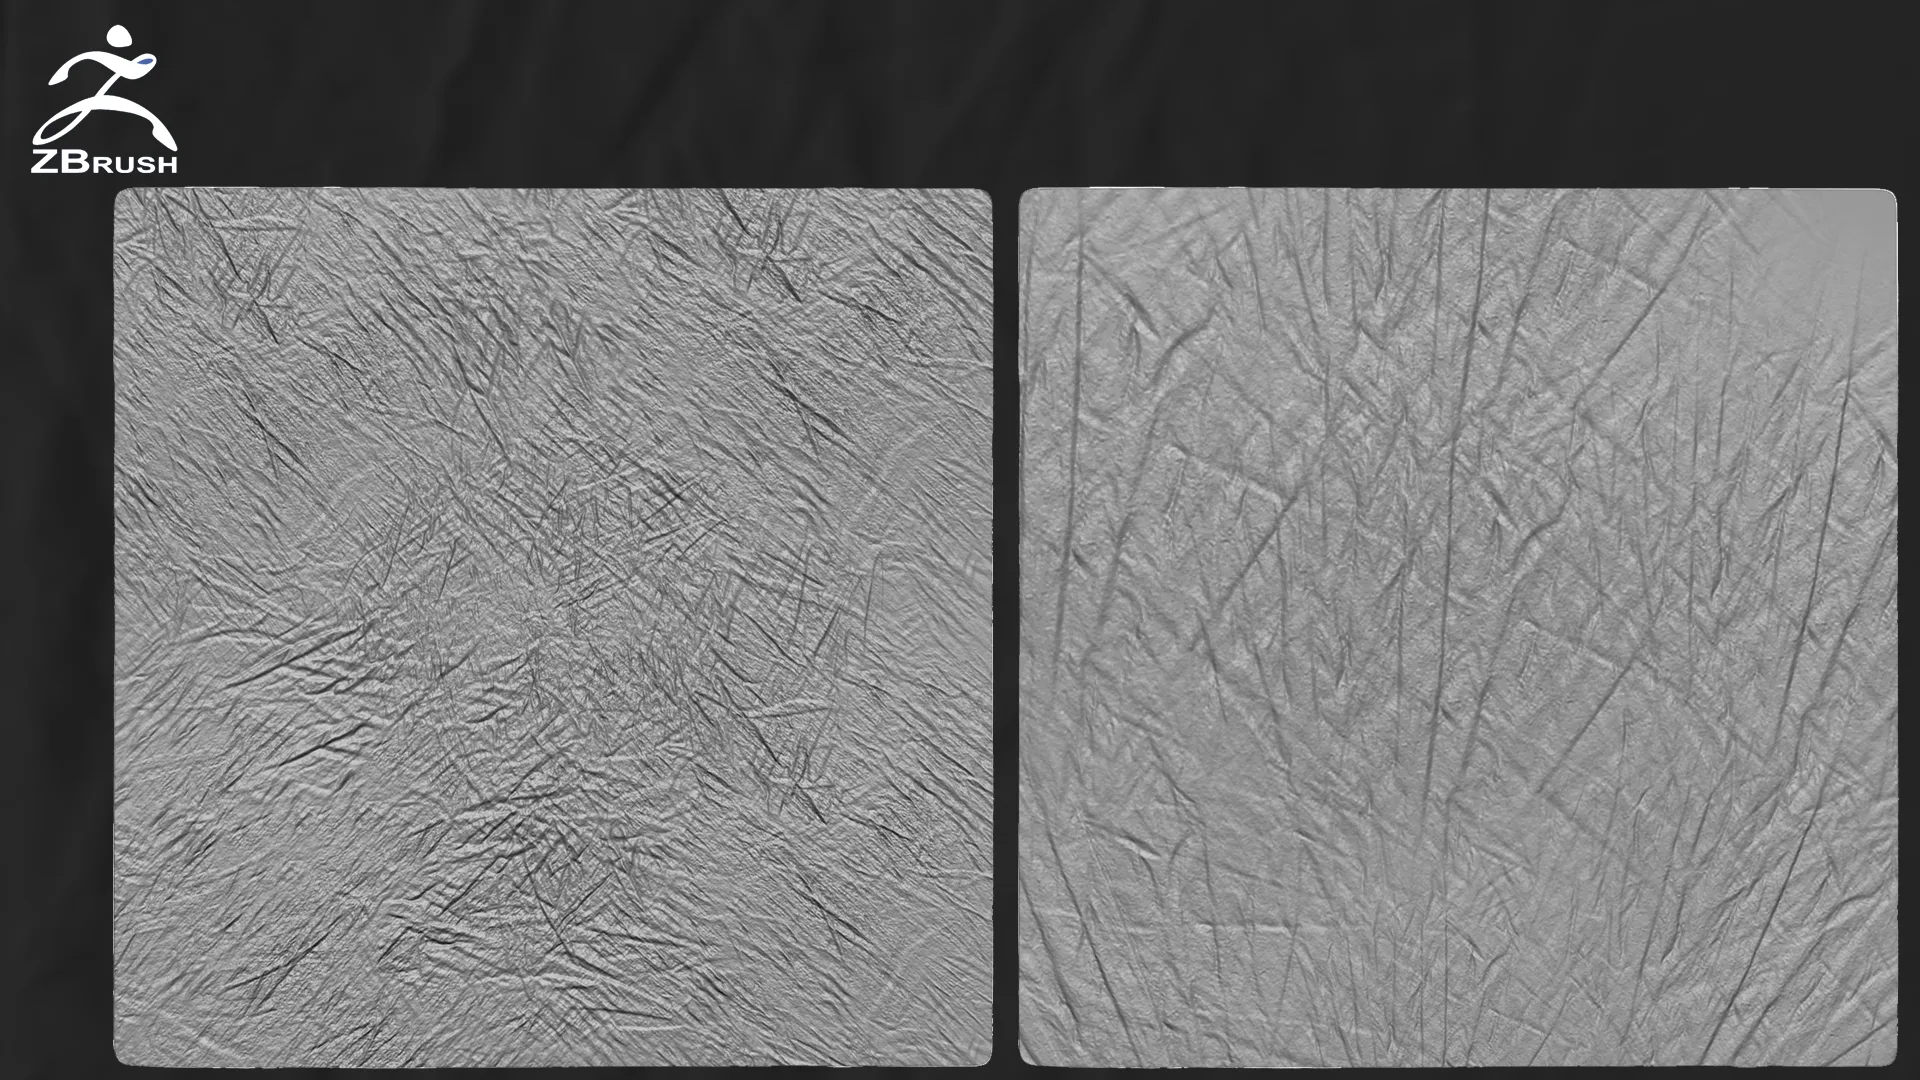 25 Memory Folds Alphas for Zbrush